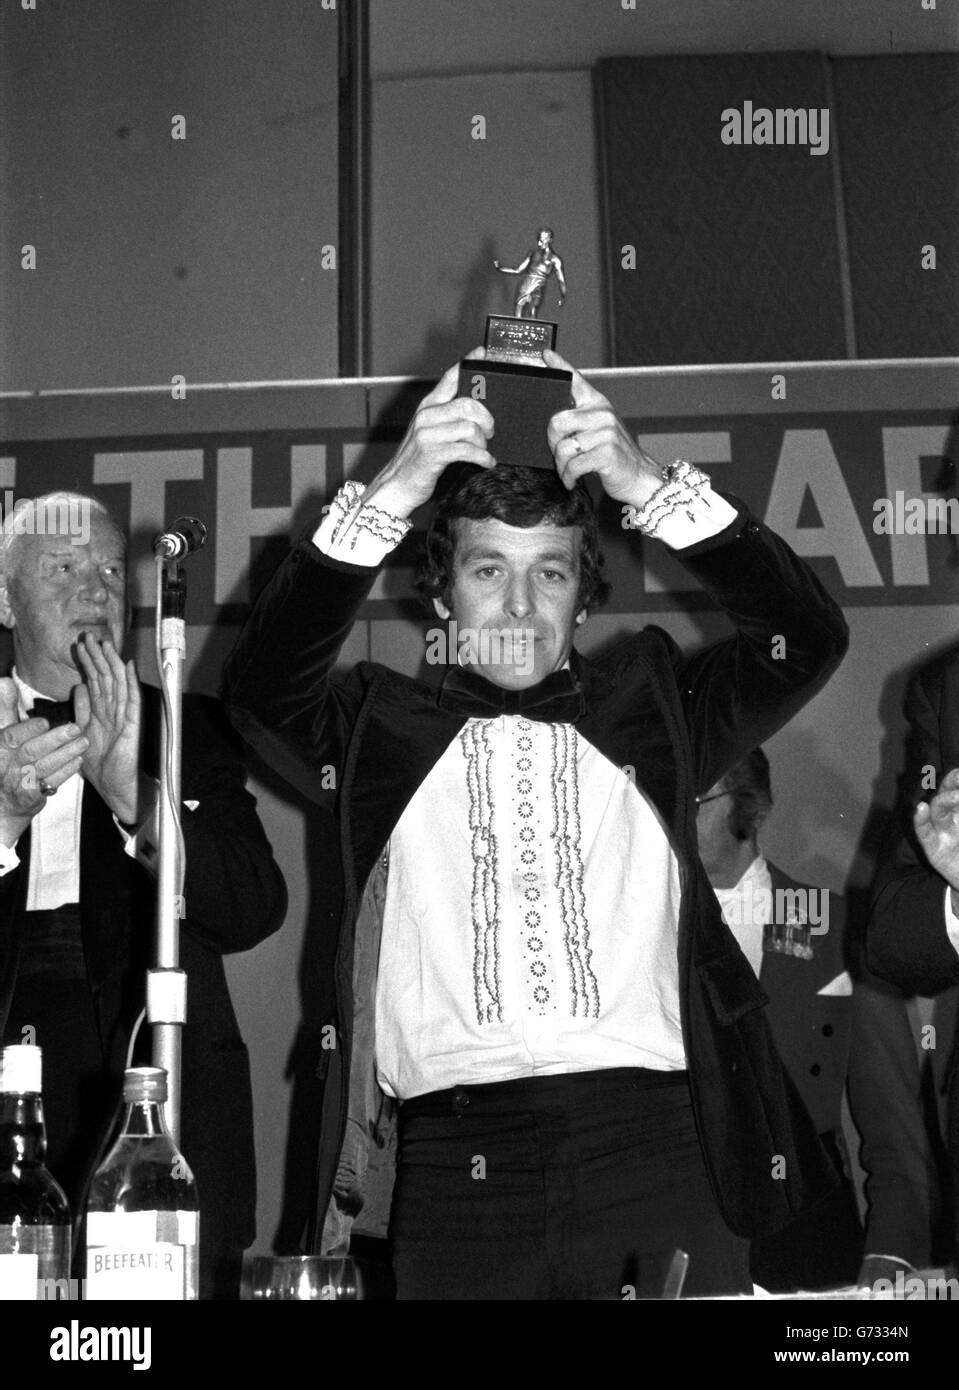 Footballer of the Year 1973-74, Ian Callaghan (Liverpool and England), holds aloft the trophy at the Football Writers Association Awards dinner at the Bloomsbury Centre Hotel. Ian's Liverpool team mates are in London sor the Cup Final match against Newcastle United at Wembley. Stock Photo